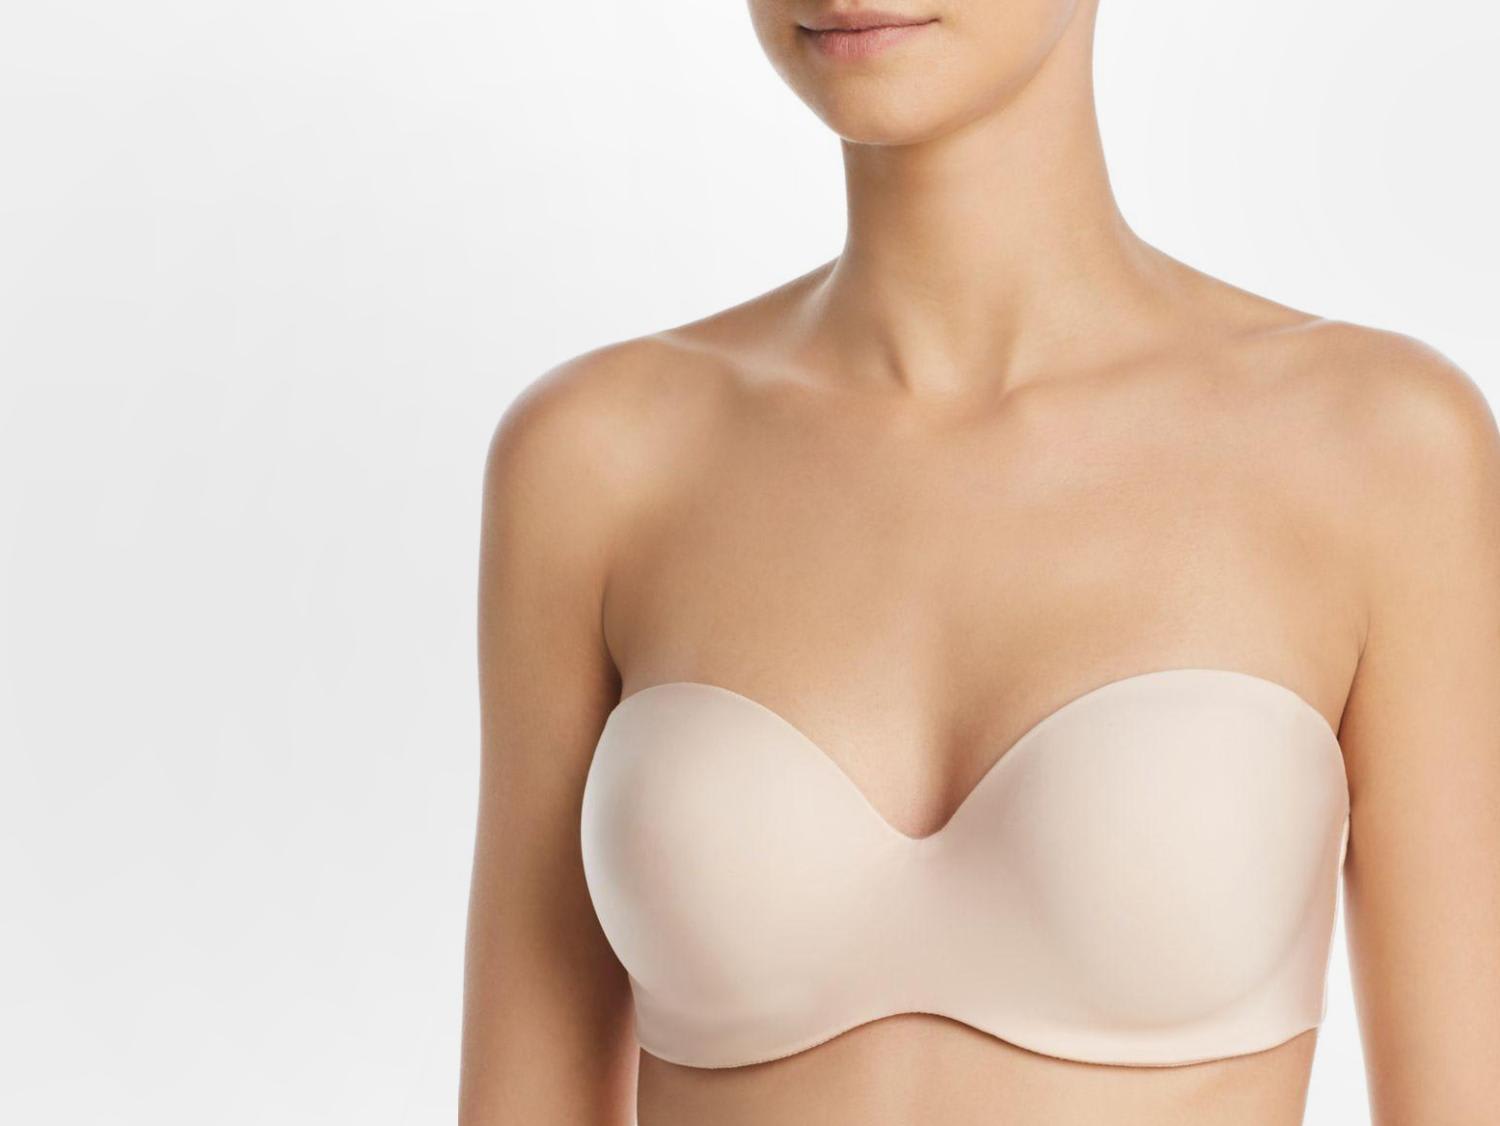 5 best strapless bras for different bust sizes that won't slip or